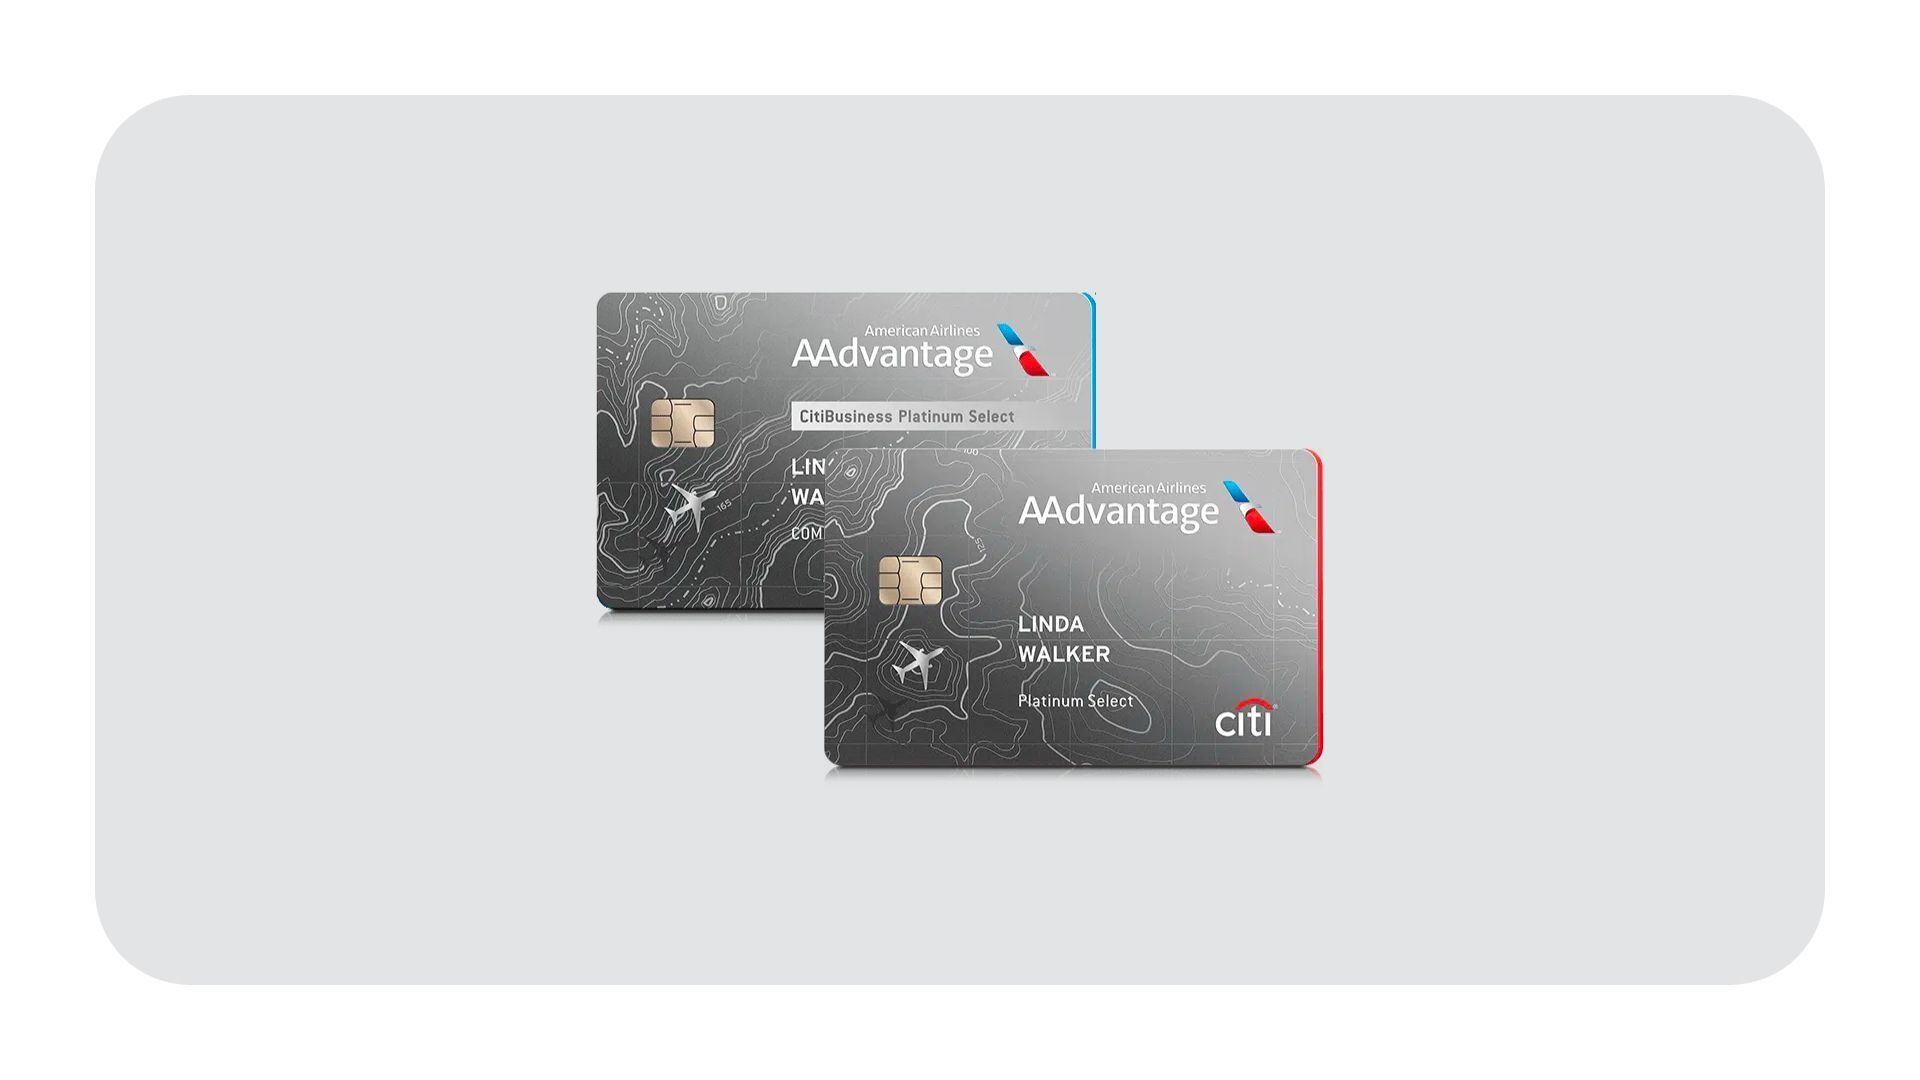 Expedite Your New Citi Card: A Quick Guide